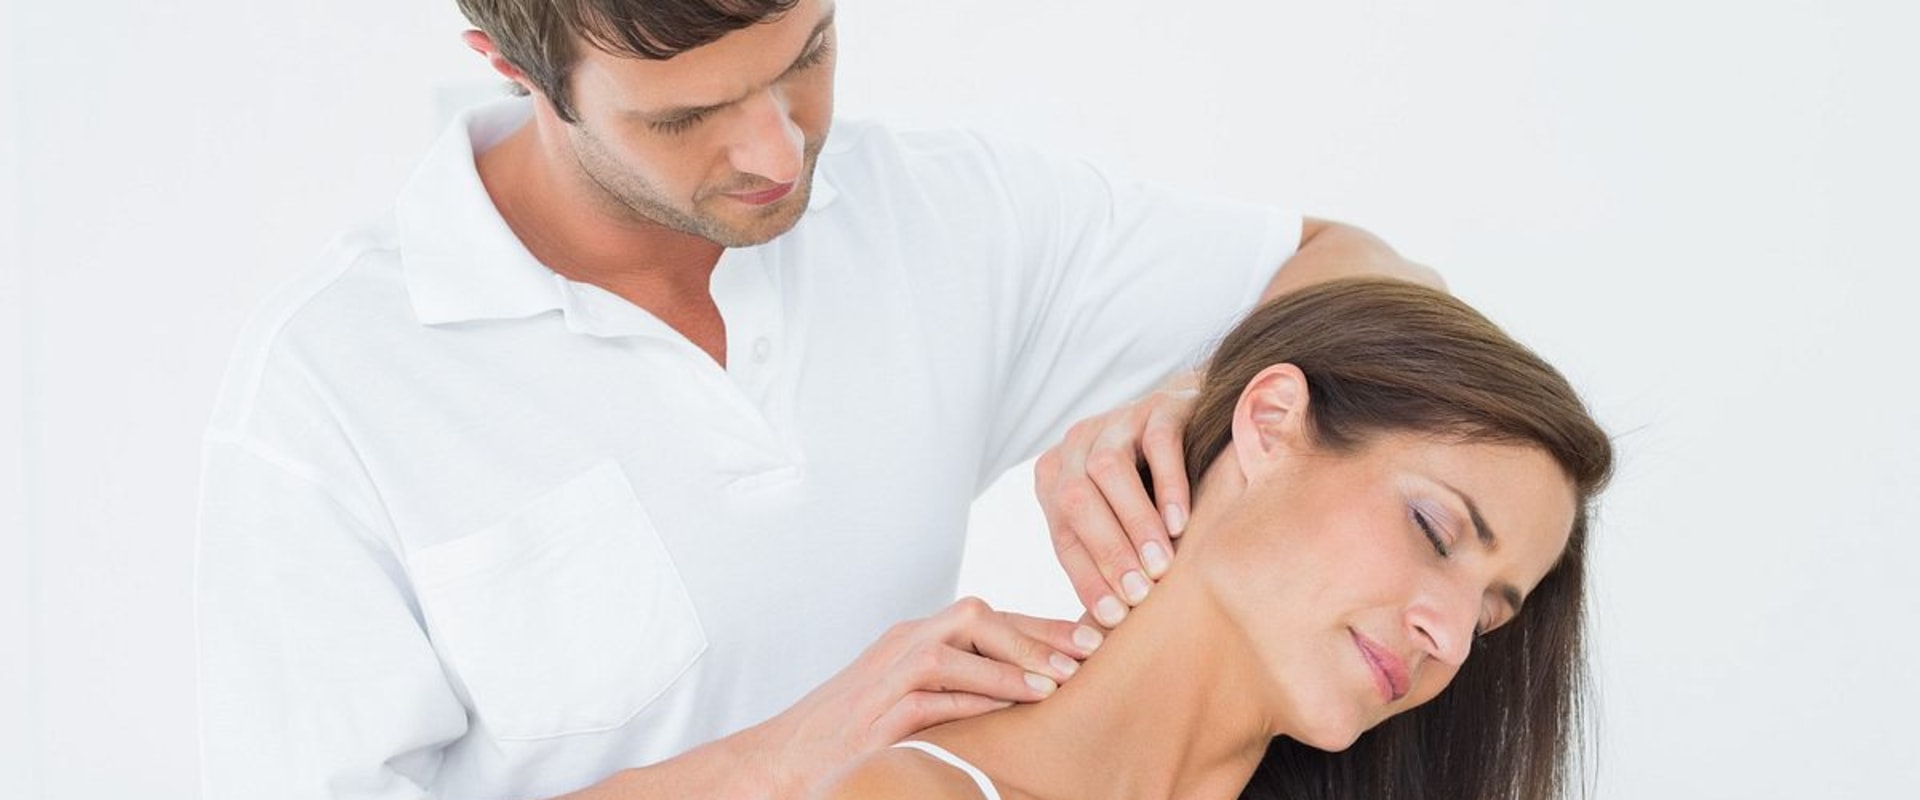 The Incredible Benefits of a Back Massage: Is it Normal for a Masseuse to Walk on Your Back?